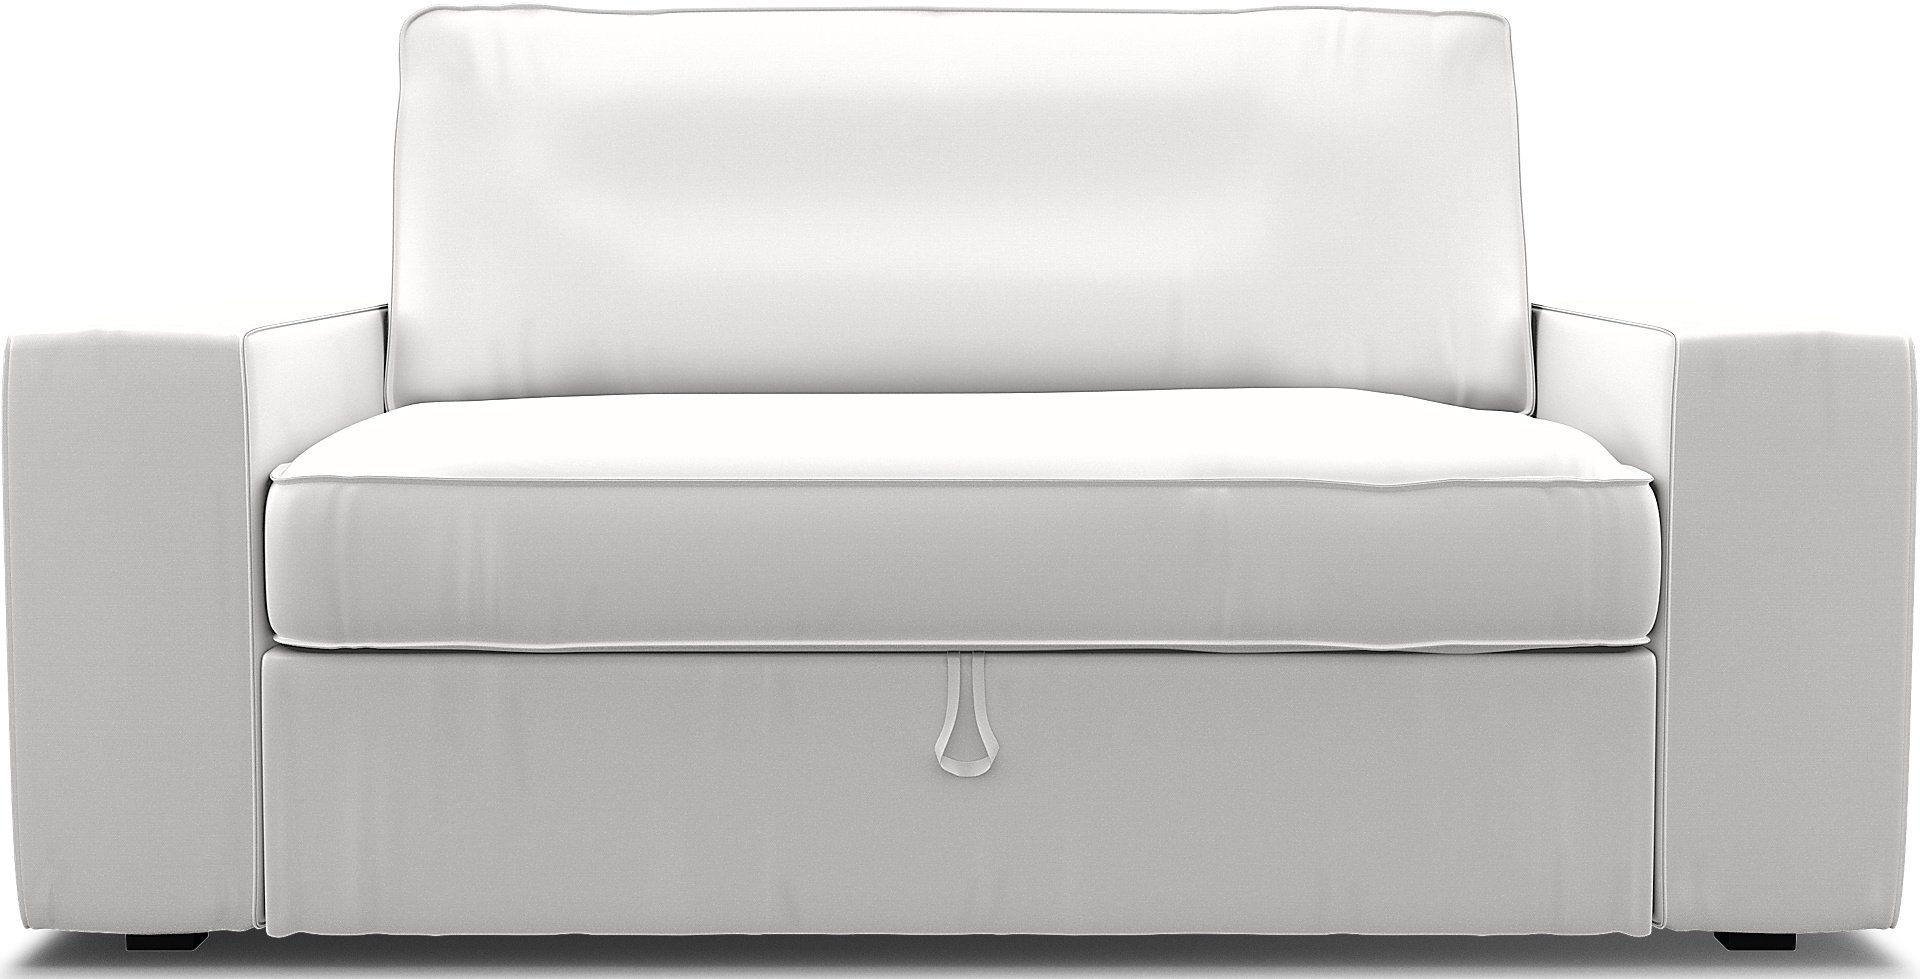 IKEA - Vilasund 2 seater sofa bed cover, Absolute White, Cotton - Bemz